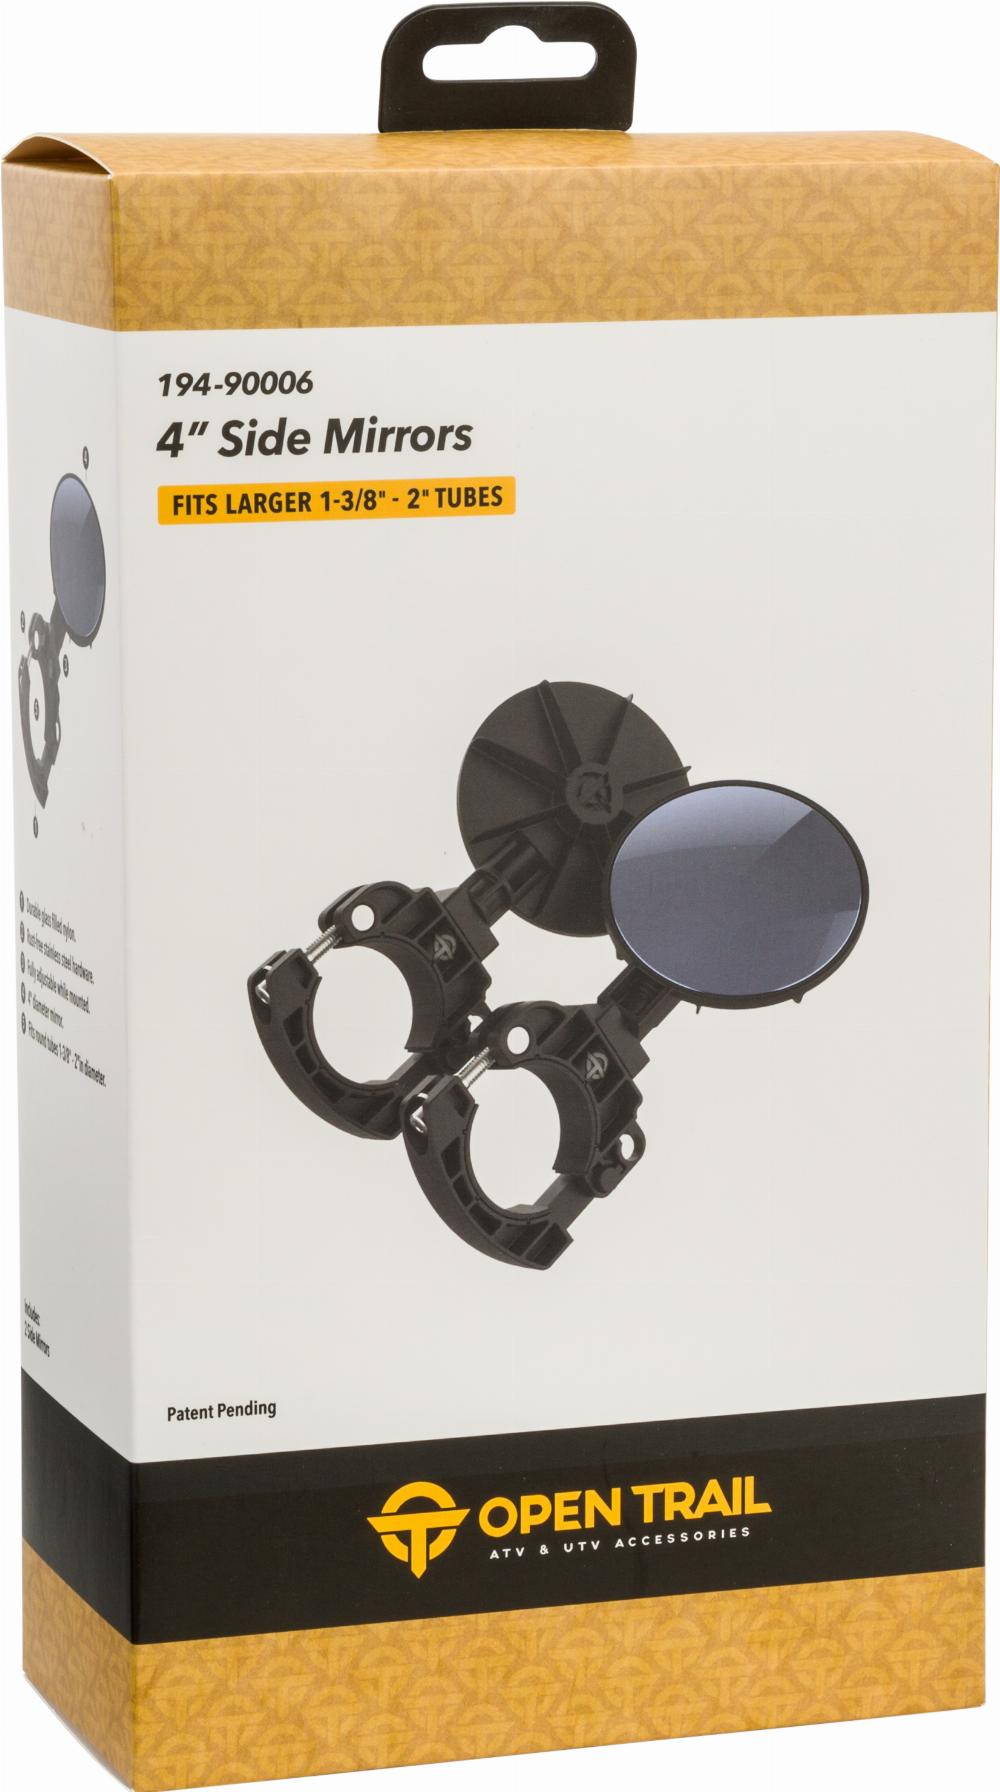 4" CLAMP SIDE MIRRORS #PSUSM